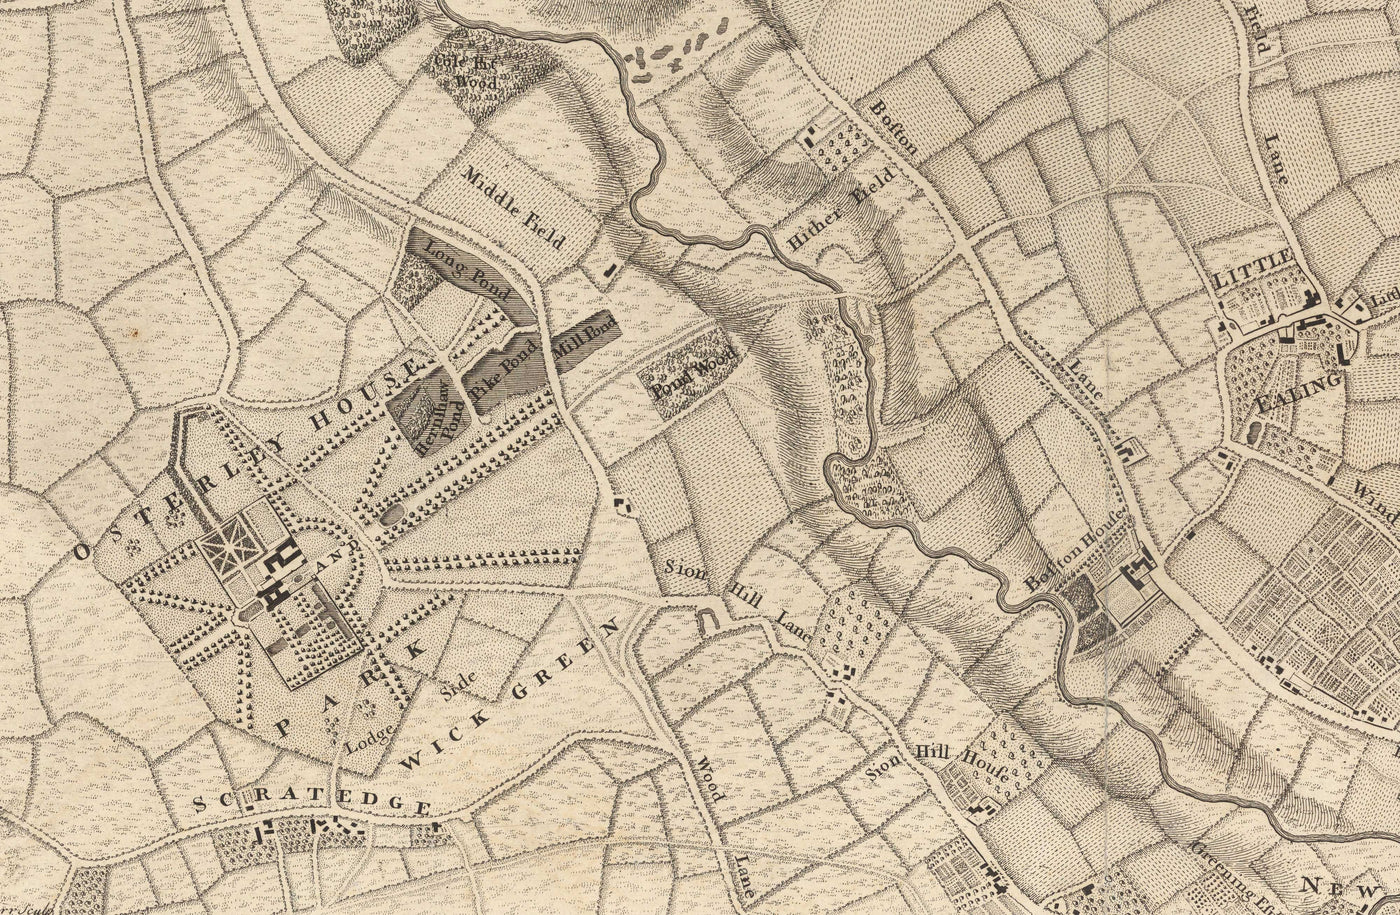 Old Map of West London in 1746 by John Rocque - Brentford, Ealing, Acton, Hanwell,  Chiswick, W3, W4, W5, W7, W13